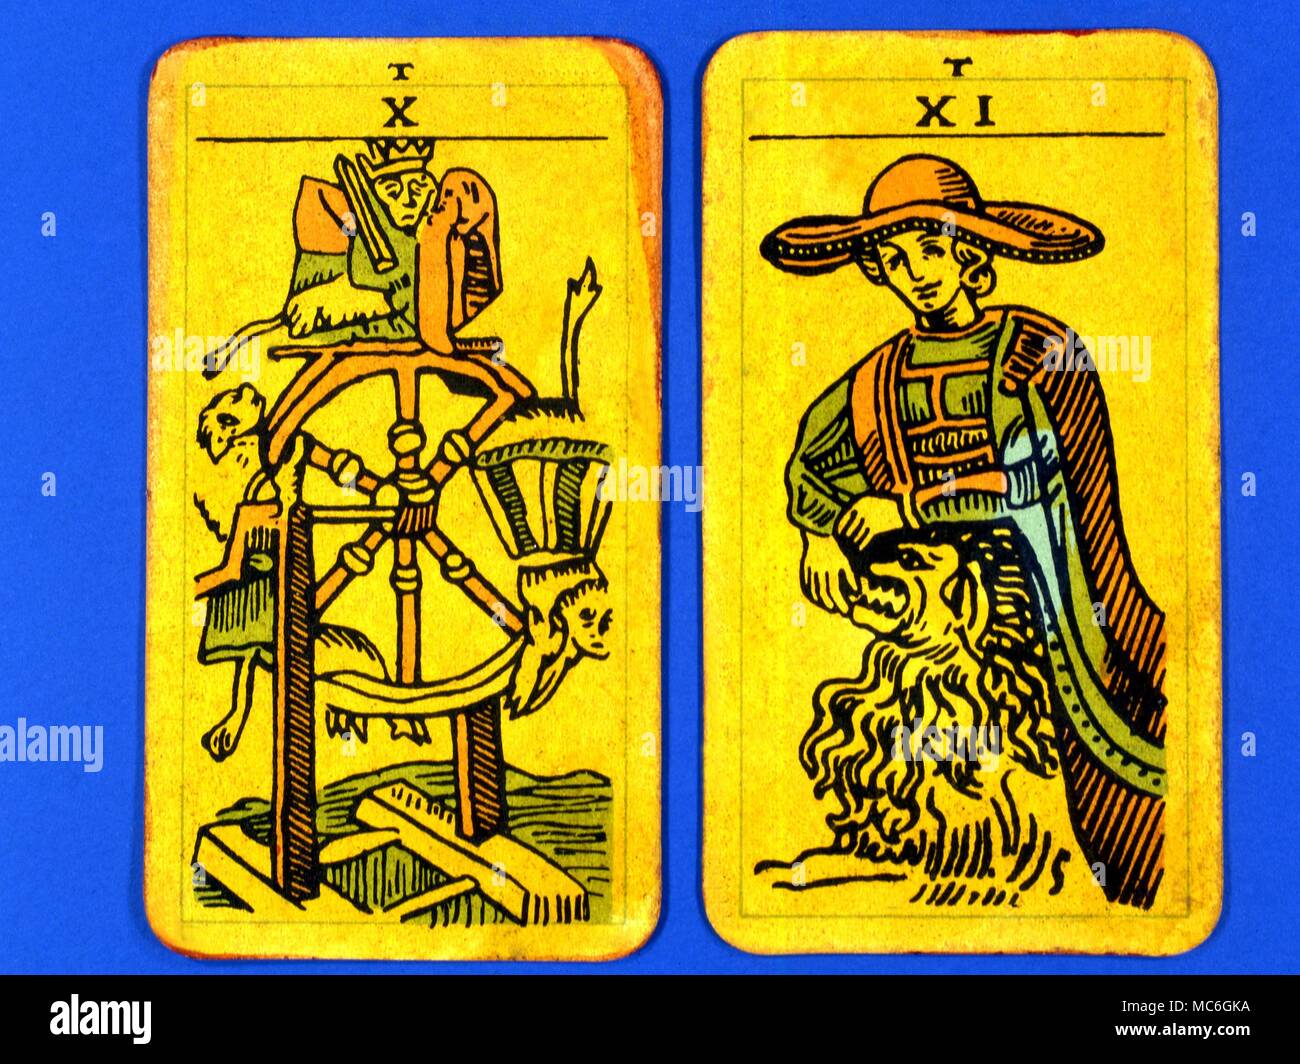 Tarot Cards-Majo Arcana- The Parisian Tarot. Card 10. The Wheel of Fortune, and Card 11. The Strength. Two cards from a Major Arcana picture Tarot, probably designed in an archaizing style in loose imitation of the Rosicrucian deck designed by Pamela Coleman Smith, alongside A.E.Waite, and various earlier decks, such as that published by Encausse (Papus) in The Tarot of the Bohemians at the end of the 19th century, post 1905, but earlier than 1912. The name Parisian Tarot was given by the owner of the deck - it might however be called the Tau Tarot, from the intriguing letter Tau at the head Stock Photo